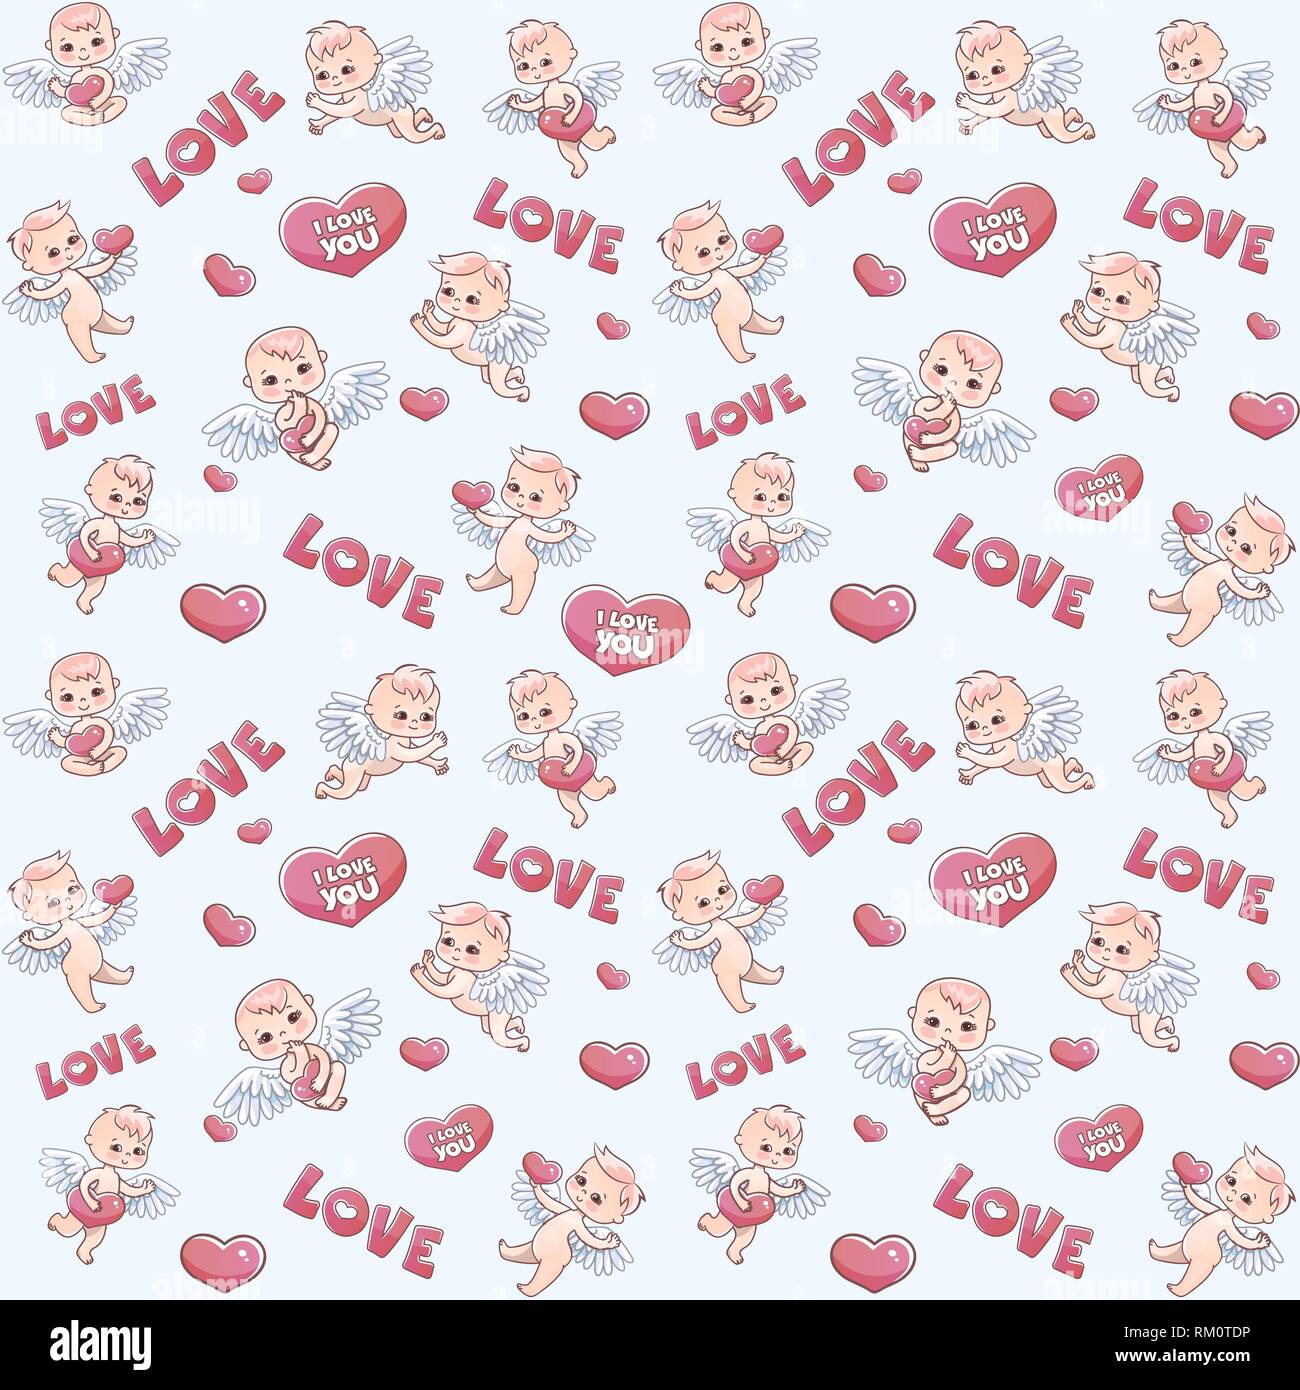 Angels with hearts in their hands. Angels and hearts pattern for Valentine's day gift. Vector pattern with serge and angels babies Stock Vector